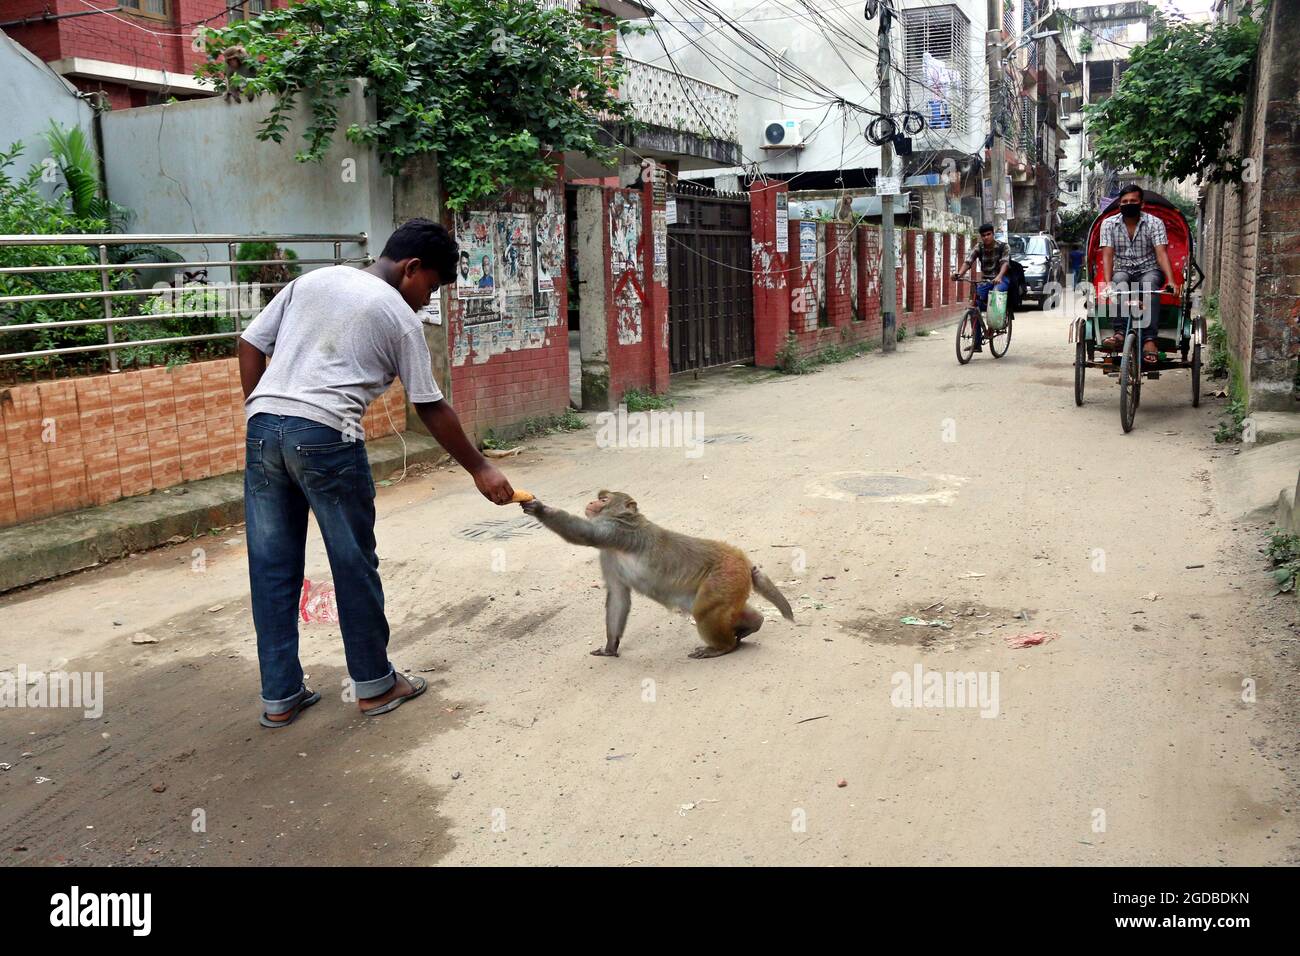 Dhaka, Bangladesh. 12th Aug, 2021. Dhaka, Bangladesh, August 12, 2021: A person feeds a Japanese macaques, on the streets of Gandaria amid Covid-19 pandemic. The Japanese macaque or red-faced macaque is a species of primate, that lives in forests and mountains, that have migrated to cities and live with humans in looking for food. Credit: Habibur Rahman/Eyepix Group/Alamy Live News Credit: Eyepix Group/Alamy Live News Stock Photo